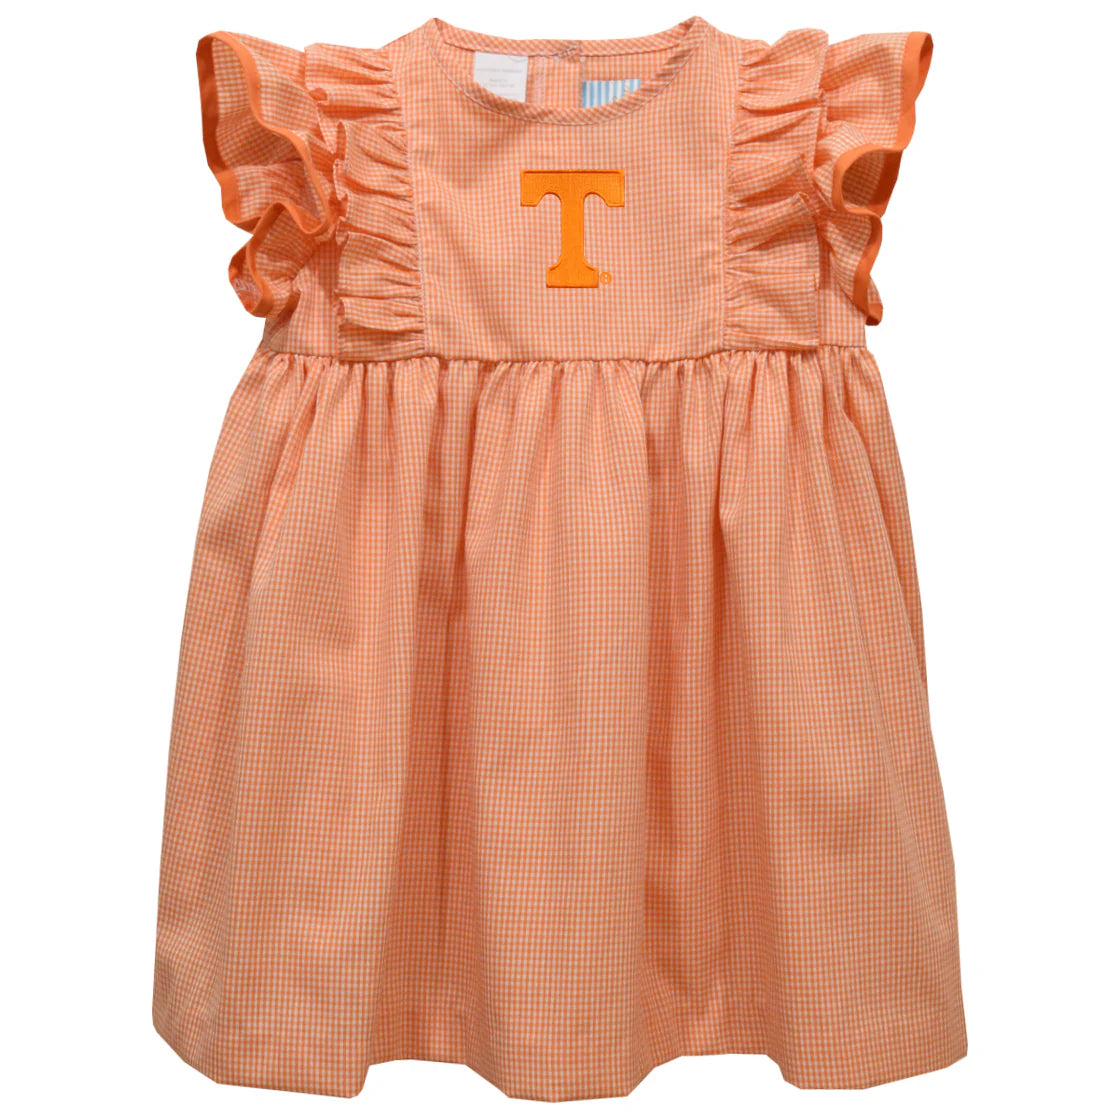 Tennessee Gingham Dress